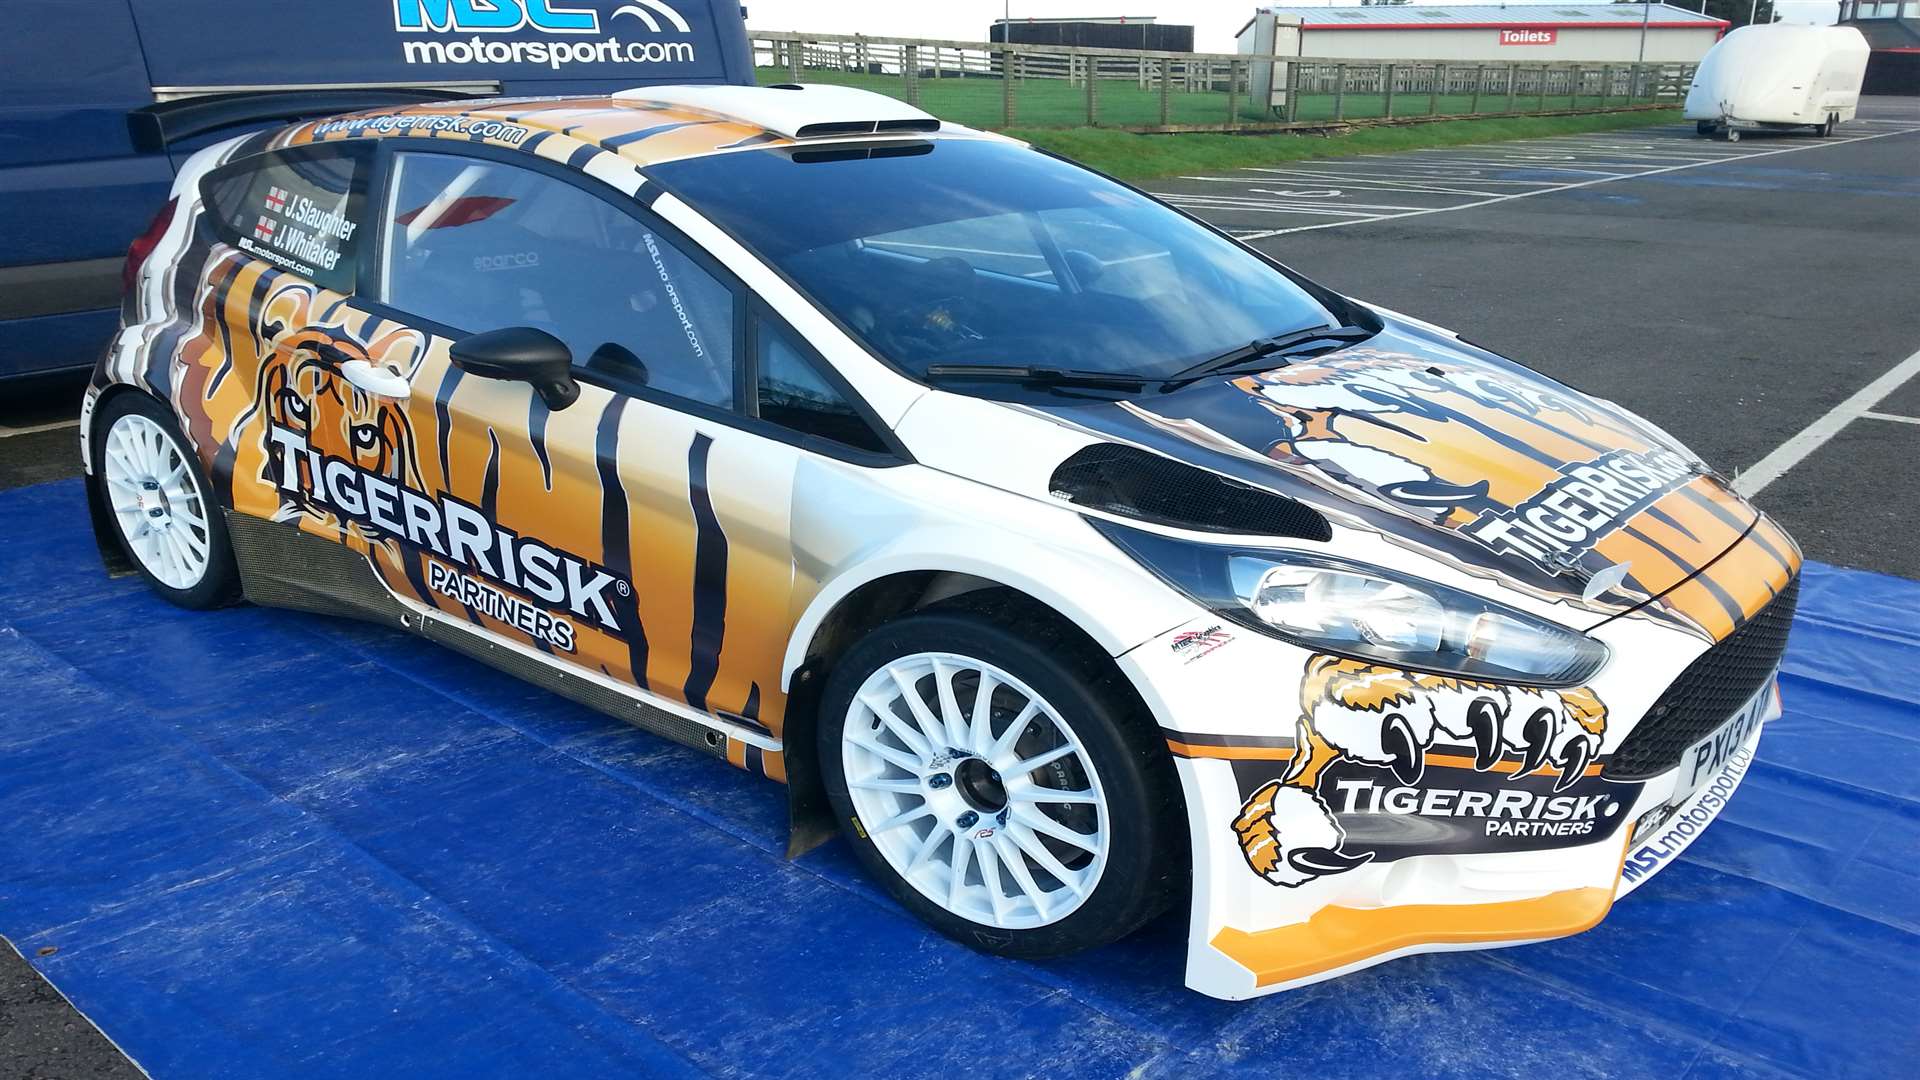 The Tiger Risk livery is striking